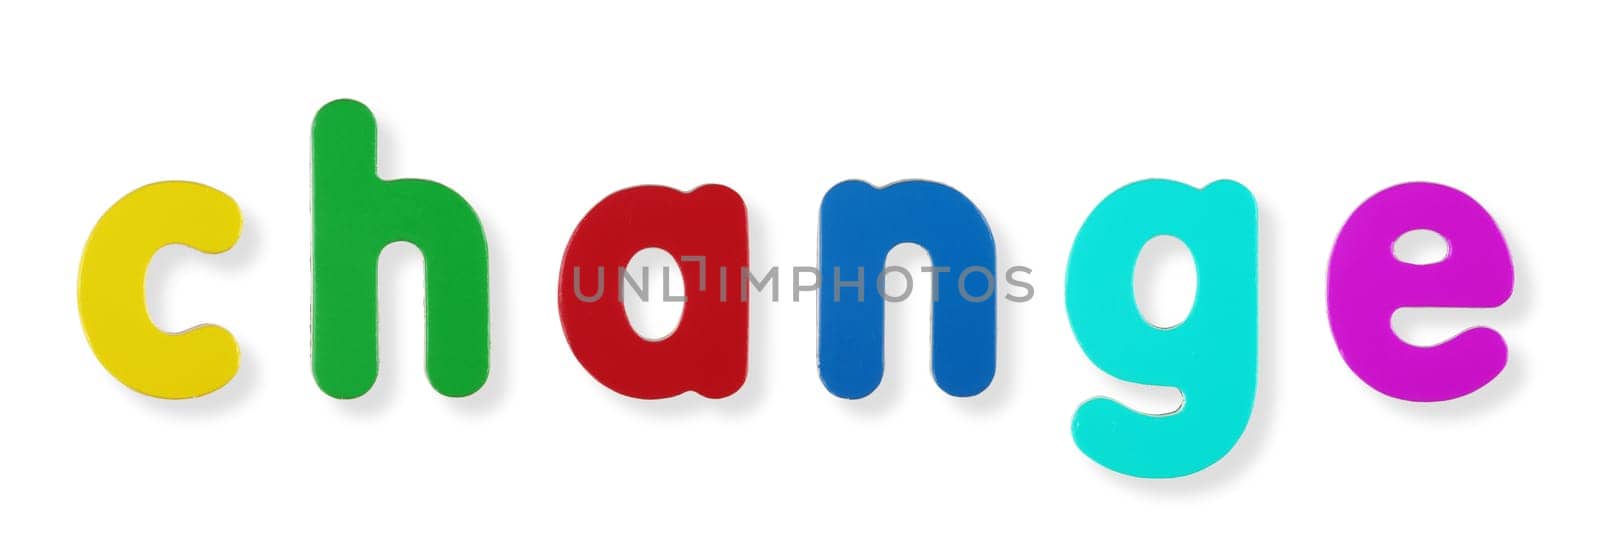 change word in magnetic letters by VivacityImages